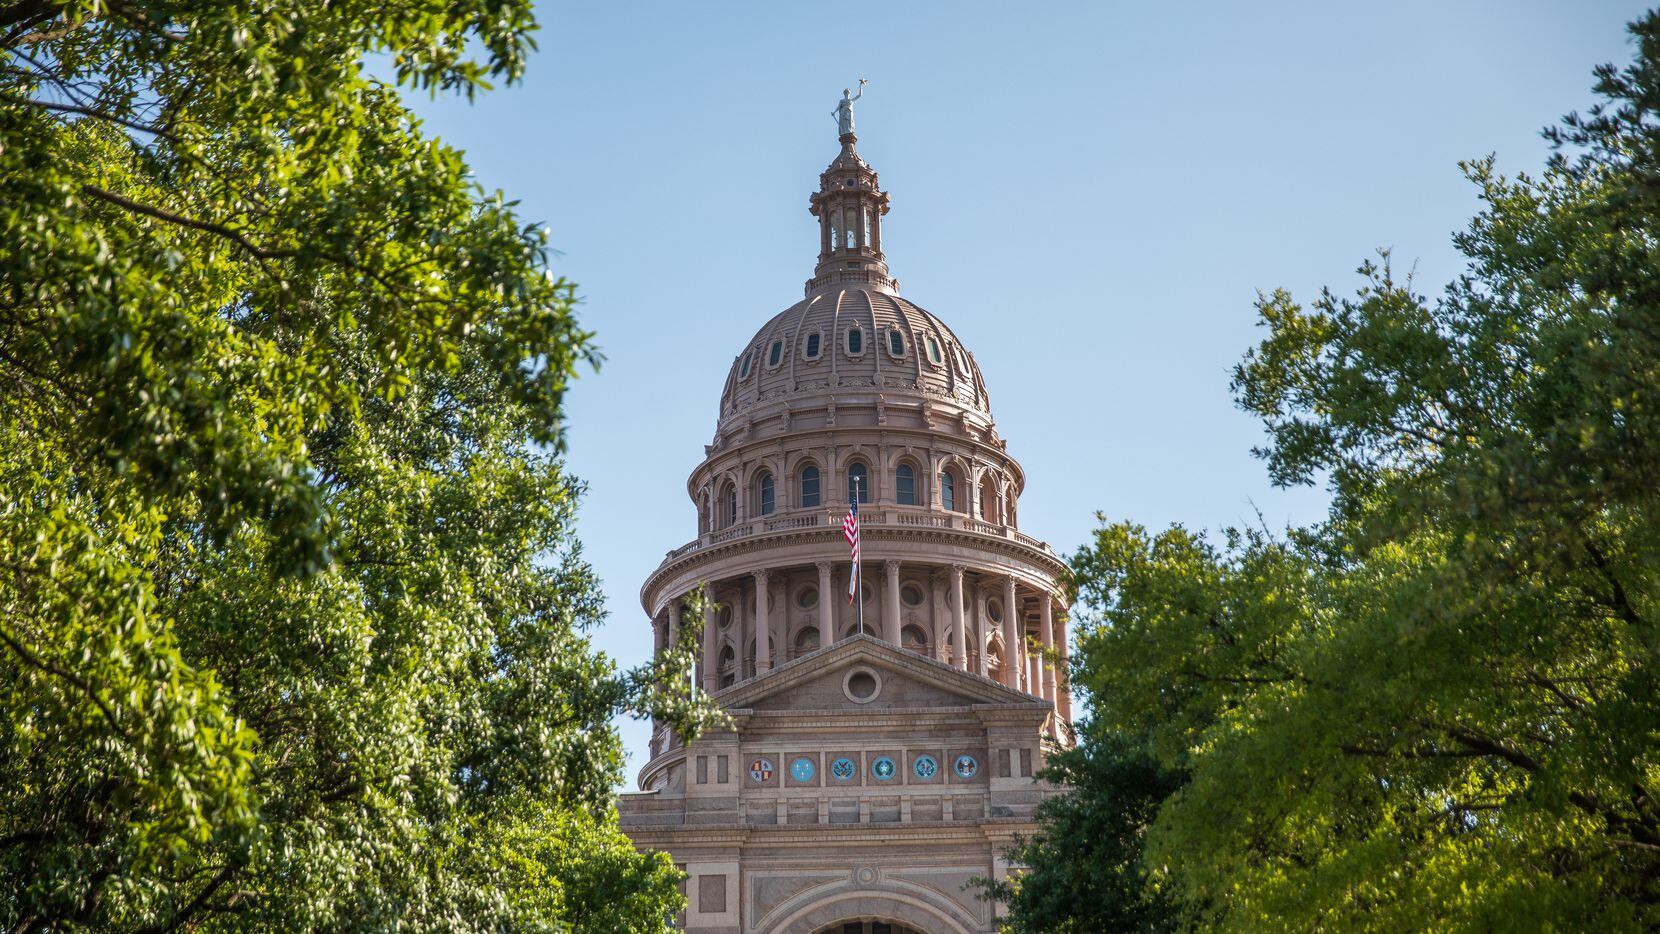 The Texas state capitol building in Austin, Texas on May 14, 2019.(Julia Robinson/Special Contributor)